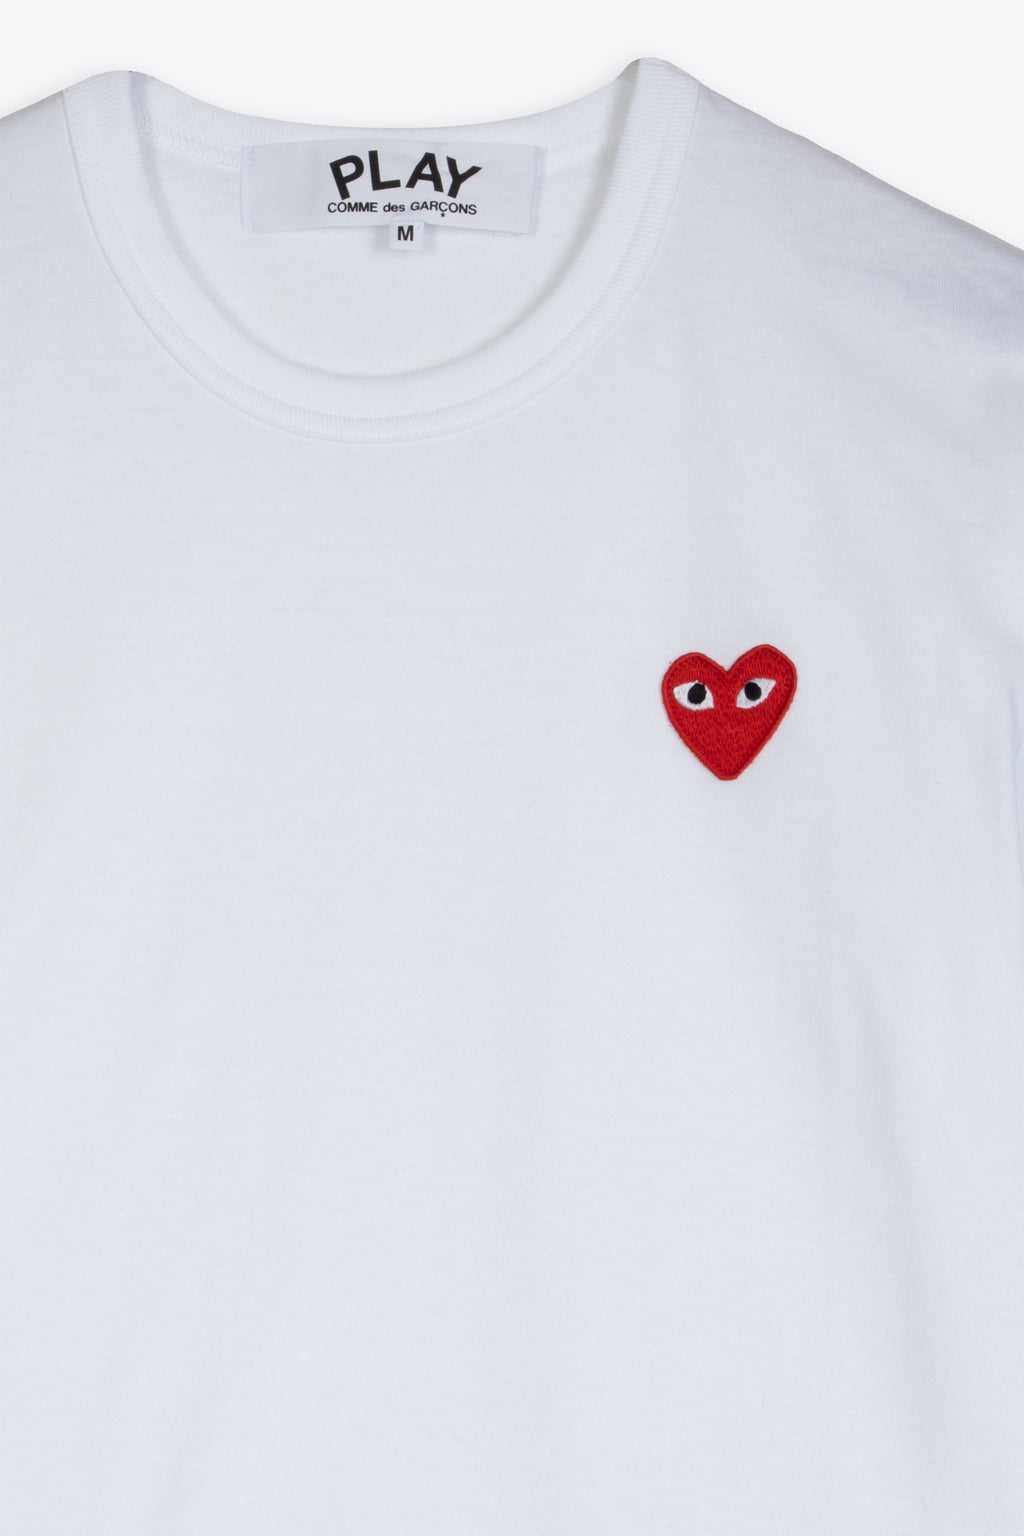 alt-image__White-cotton-t-shirt-with-red-heart-patch-at-chest